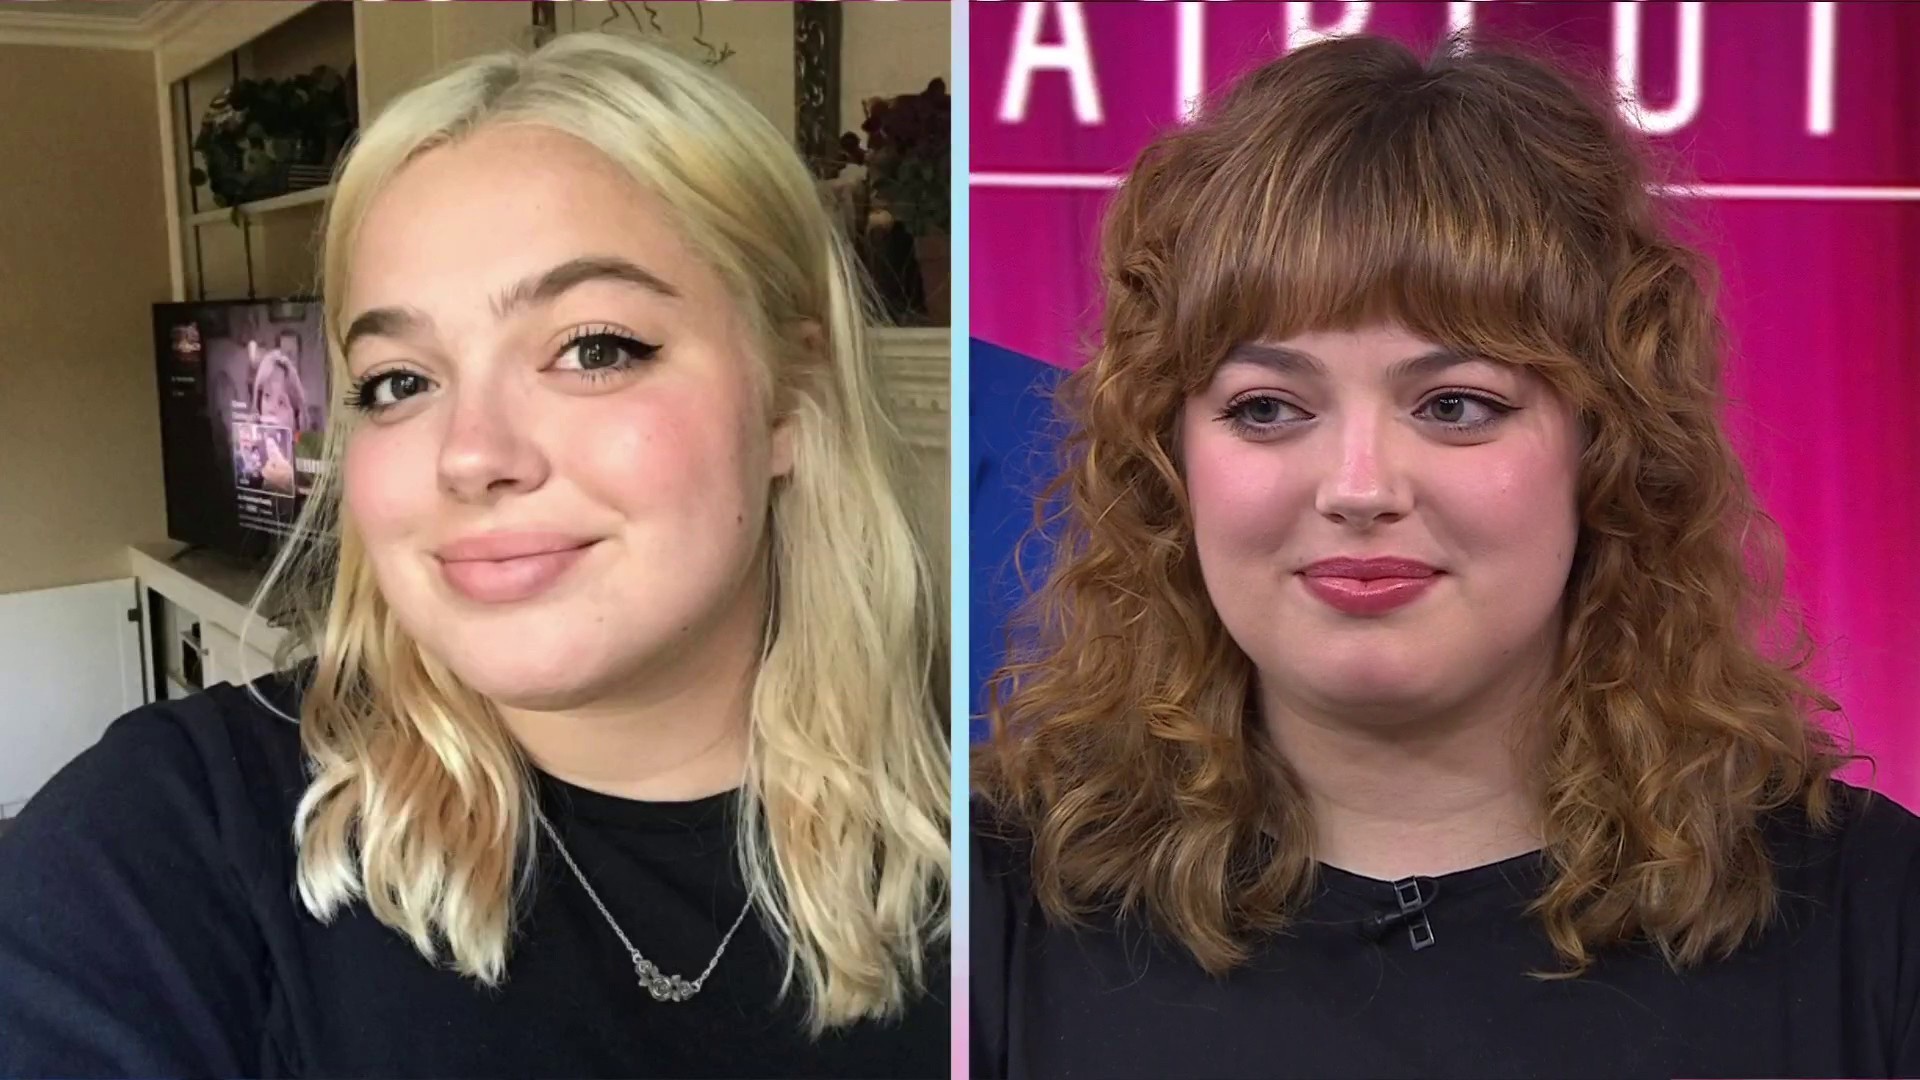 Summer Lucille Gifts Prom Dress To Plus-Size Teen In Viral TikTok